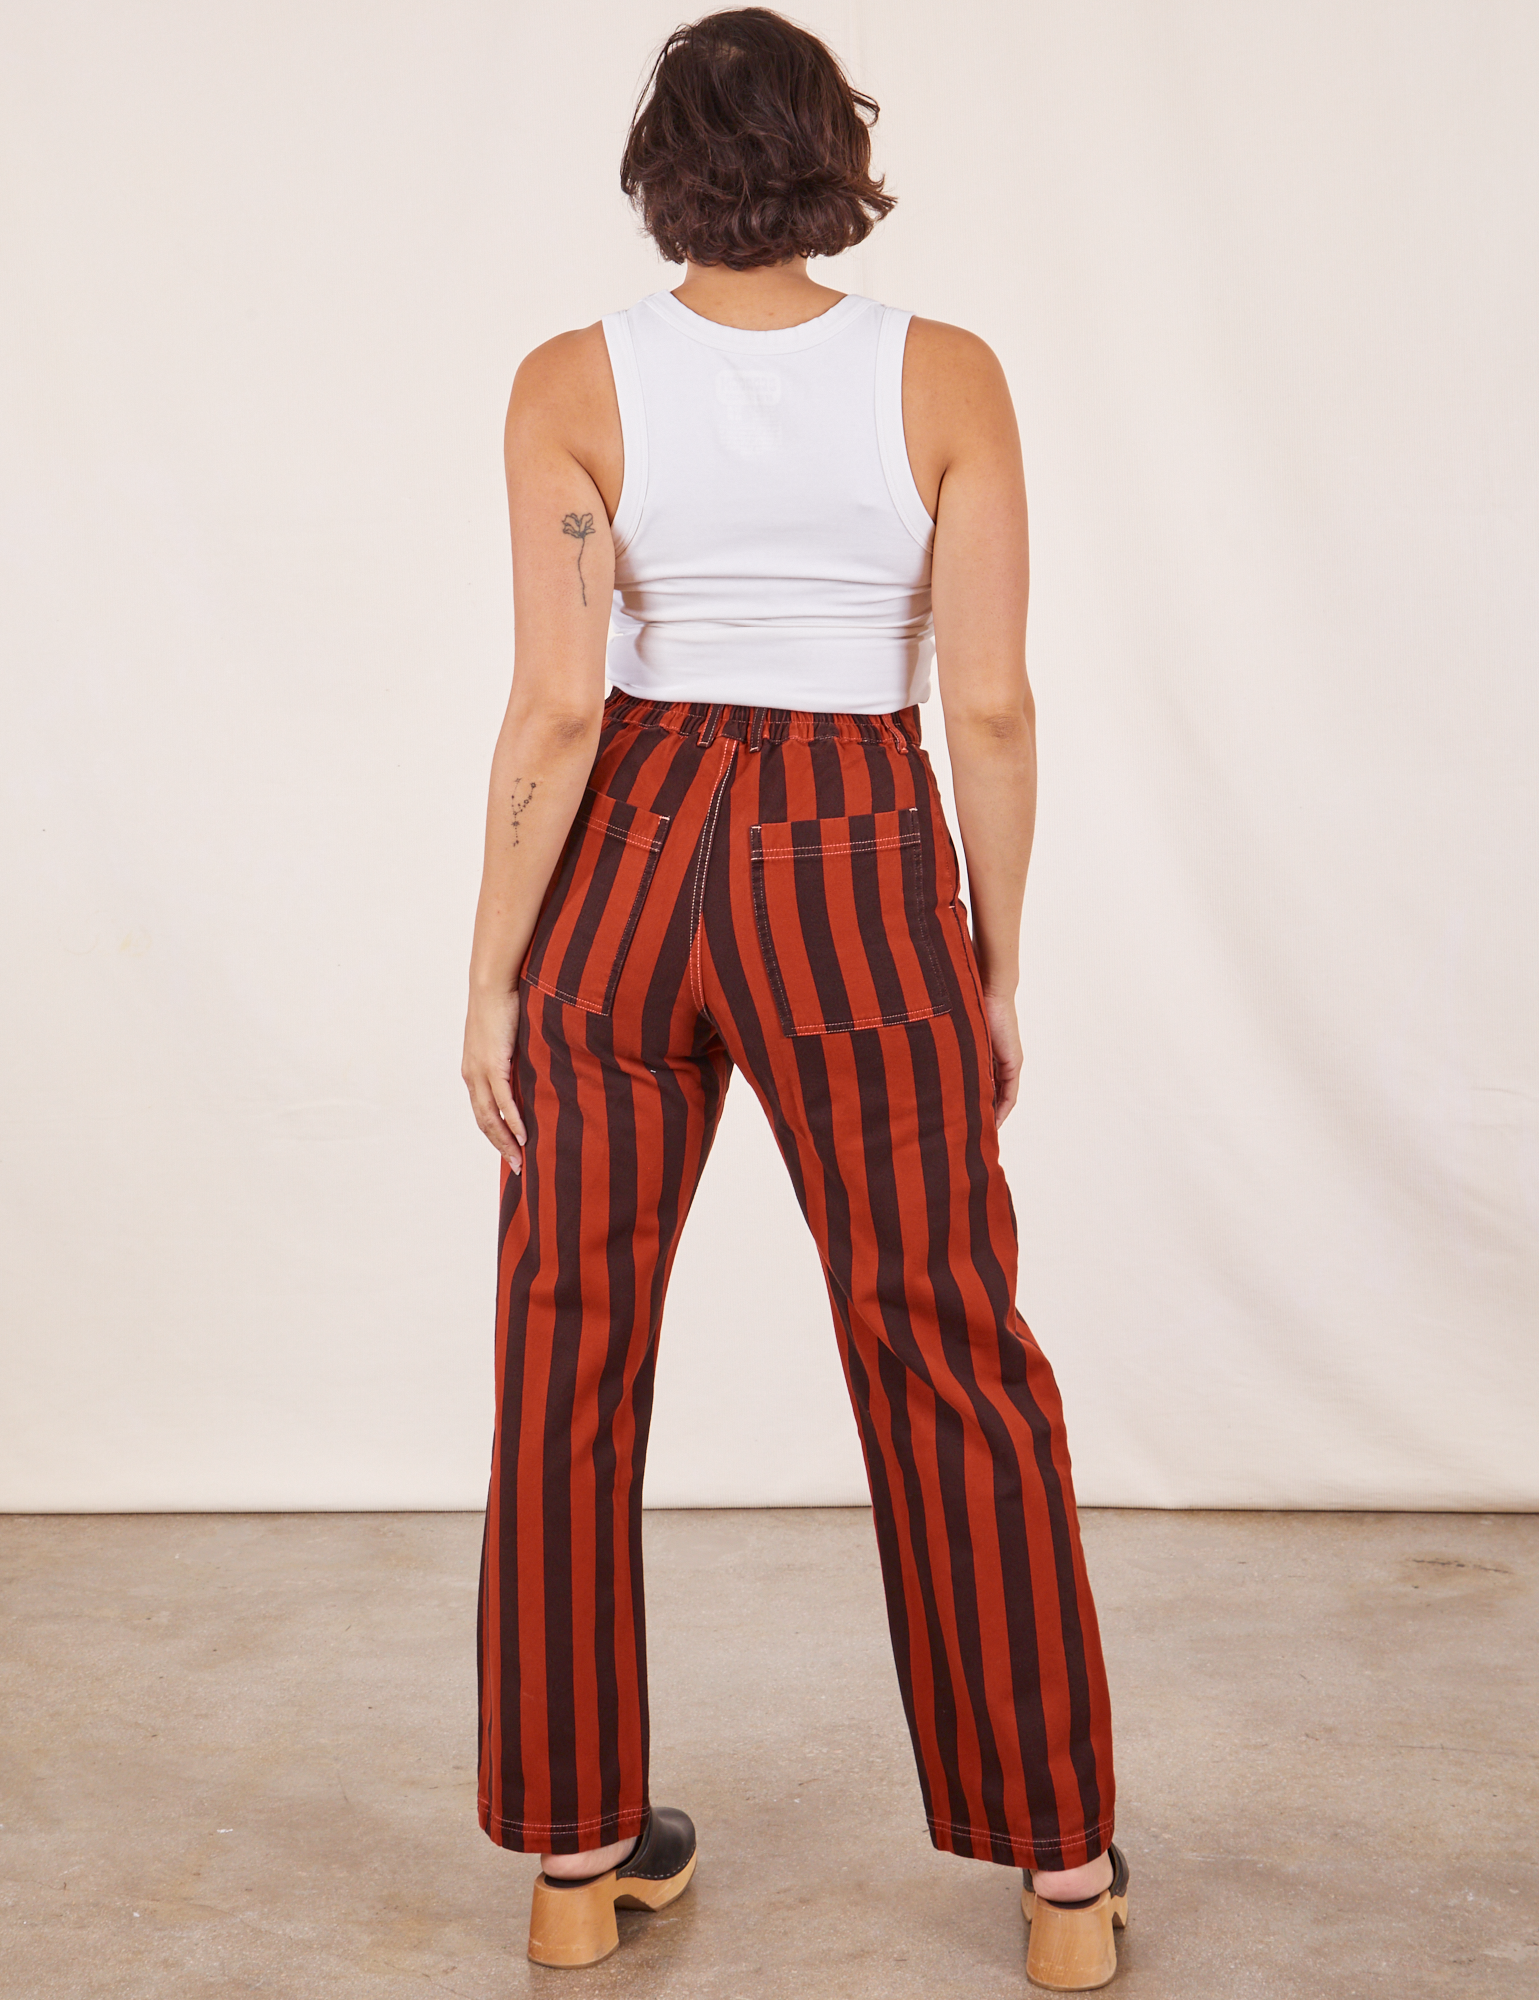 Back view of Black Striped Work Pants in Paprika and vintage off-white Cropped Tank Top on Tiara